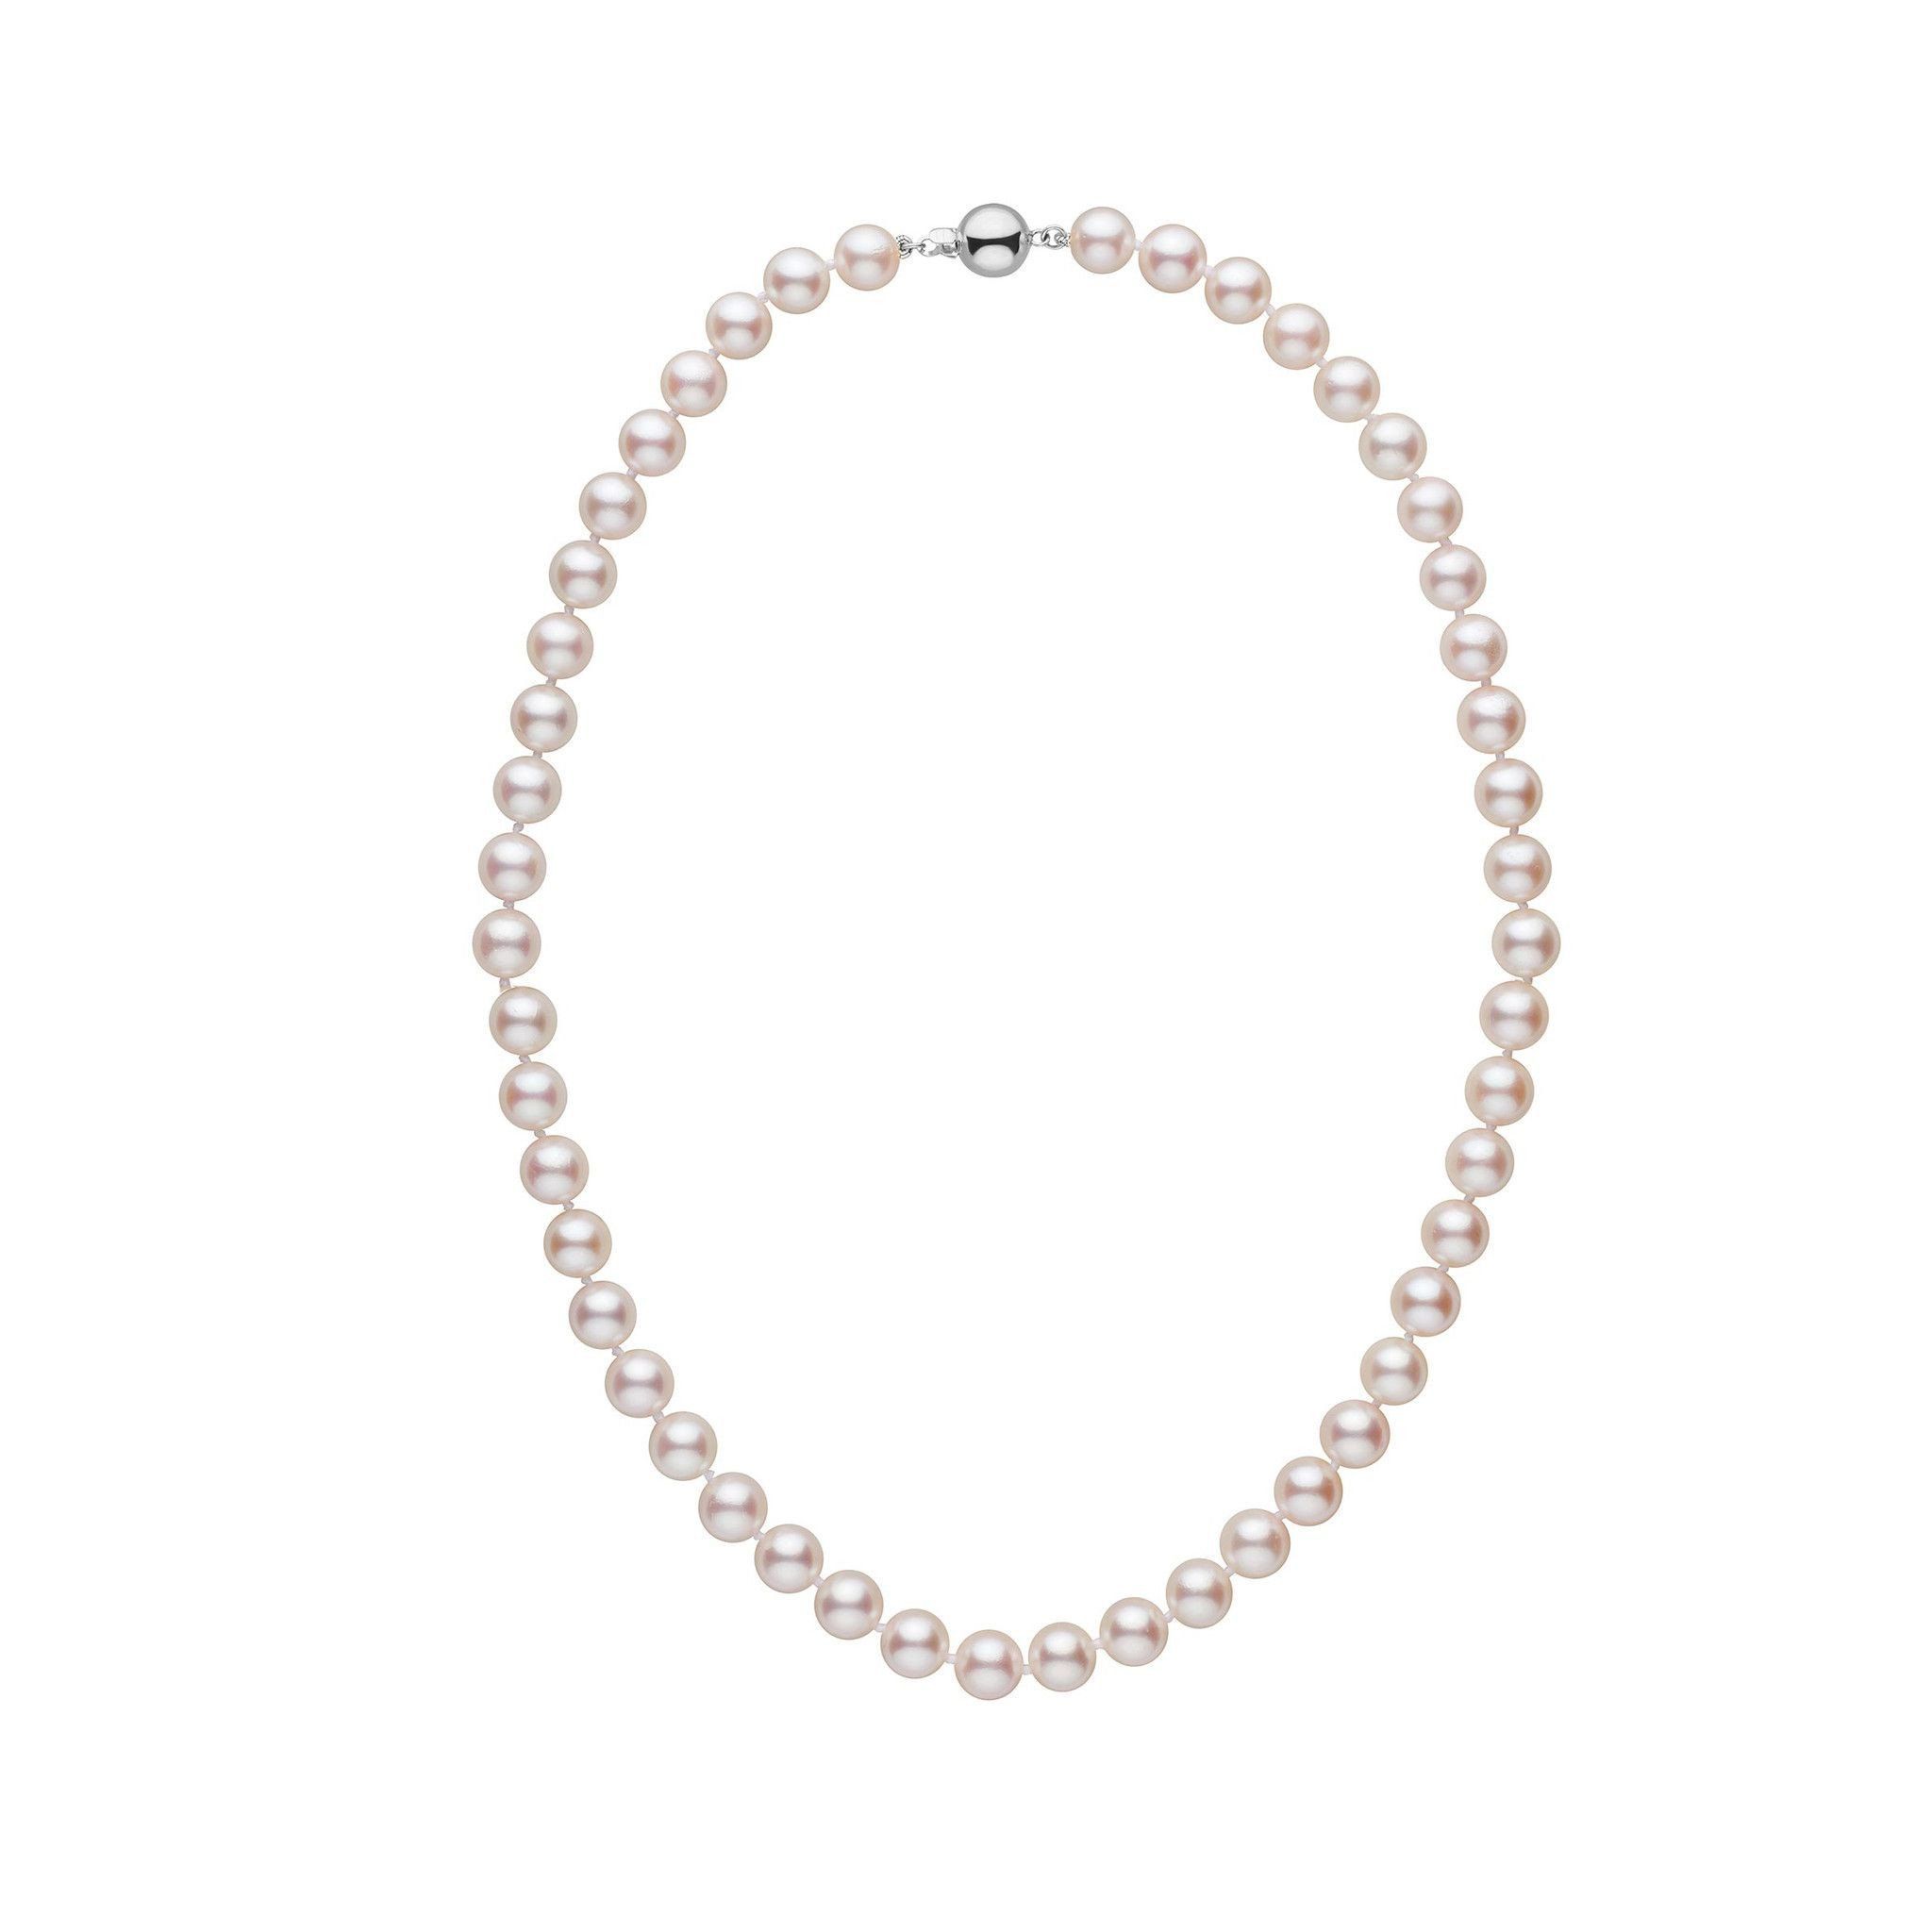 7.5-8.0 mm 16 inch AA+ White Akoya Pearl Necklace White Gold